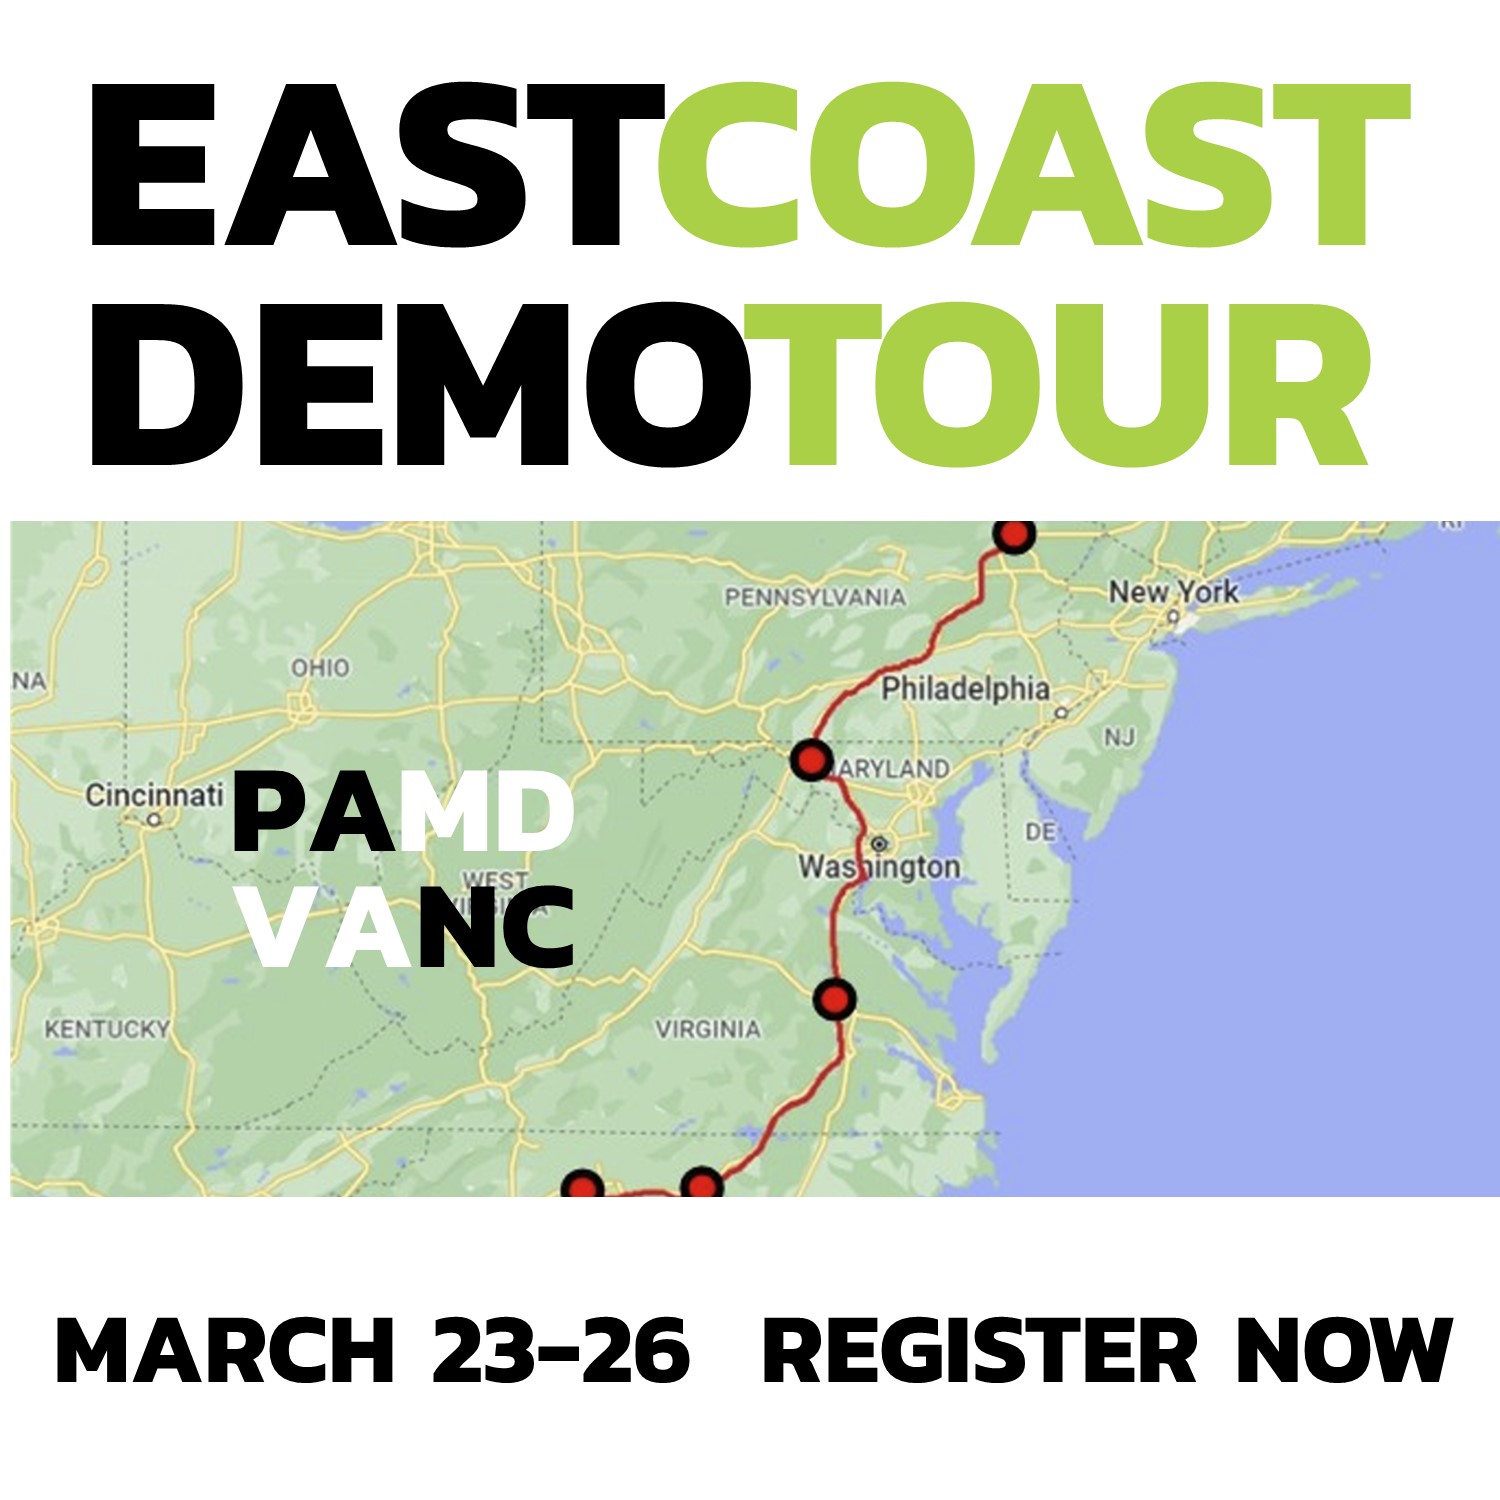 Ready for the East Coast Demo Tour? Up Equip is waiting for you!